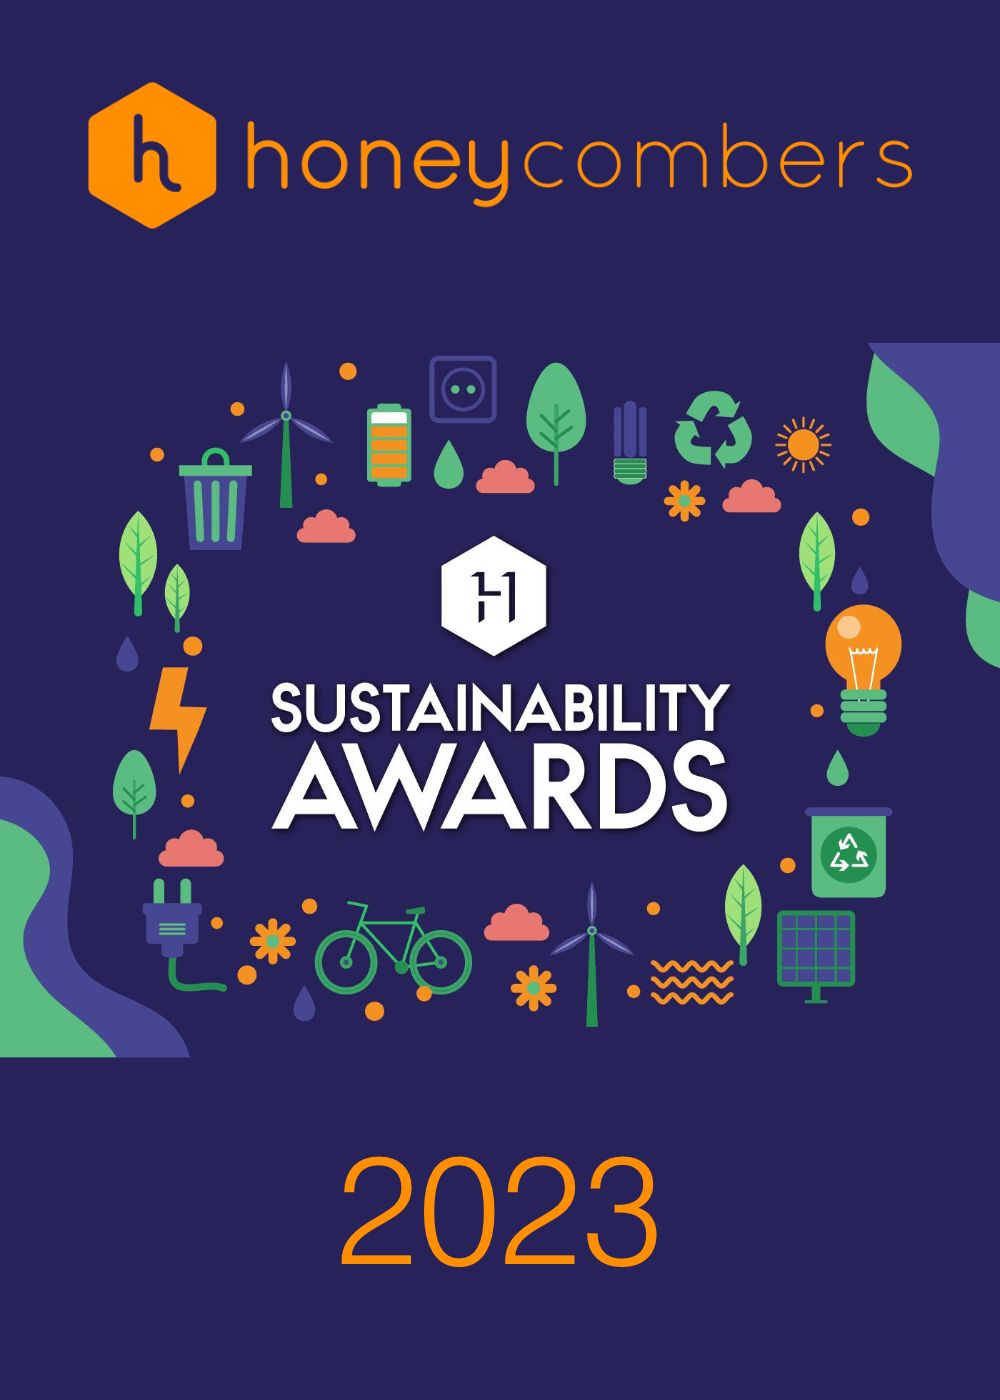 We've been nominated in the Honeycombers Sustainability Awards!